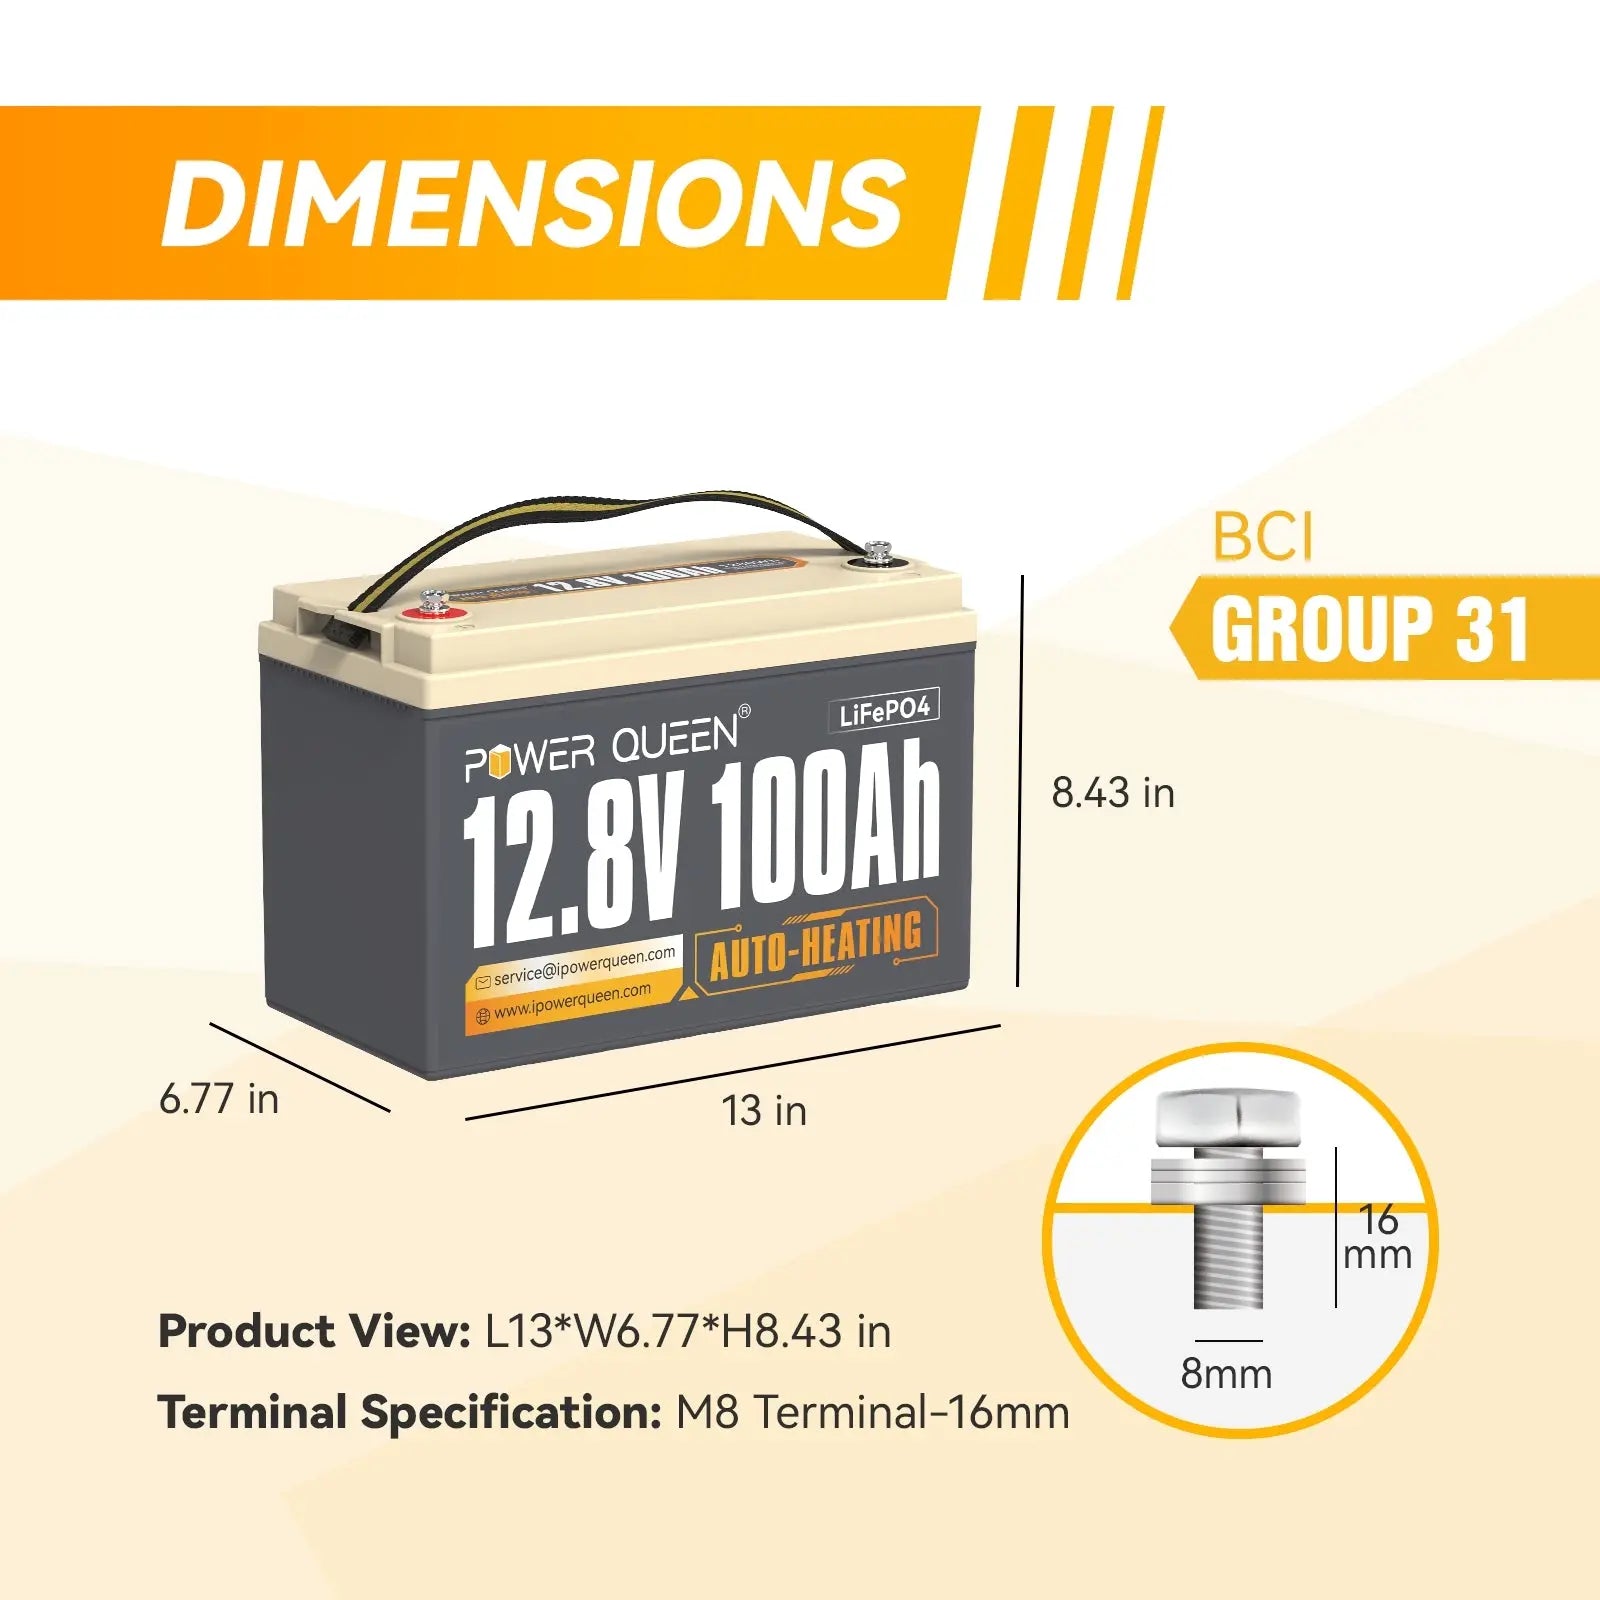 the dimensions of Power Queen 12V 100Ah Self-Heating Deep Cycle Lithium Battery